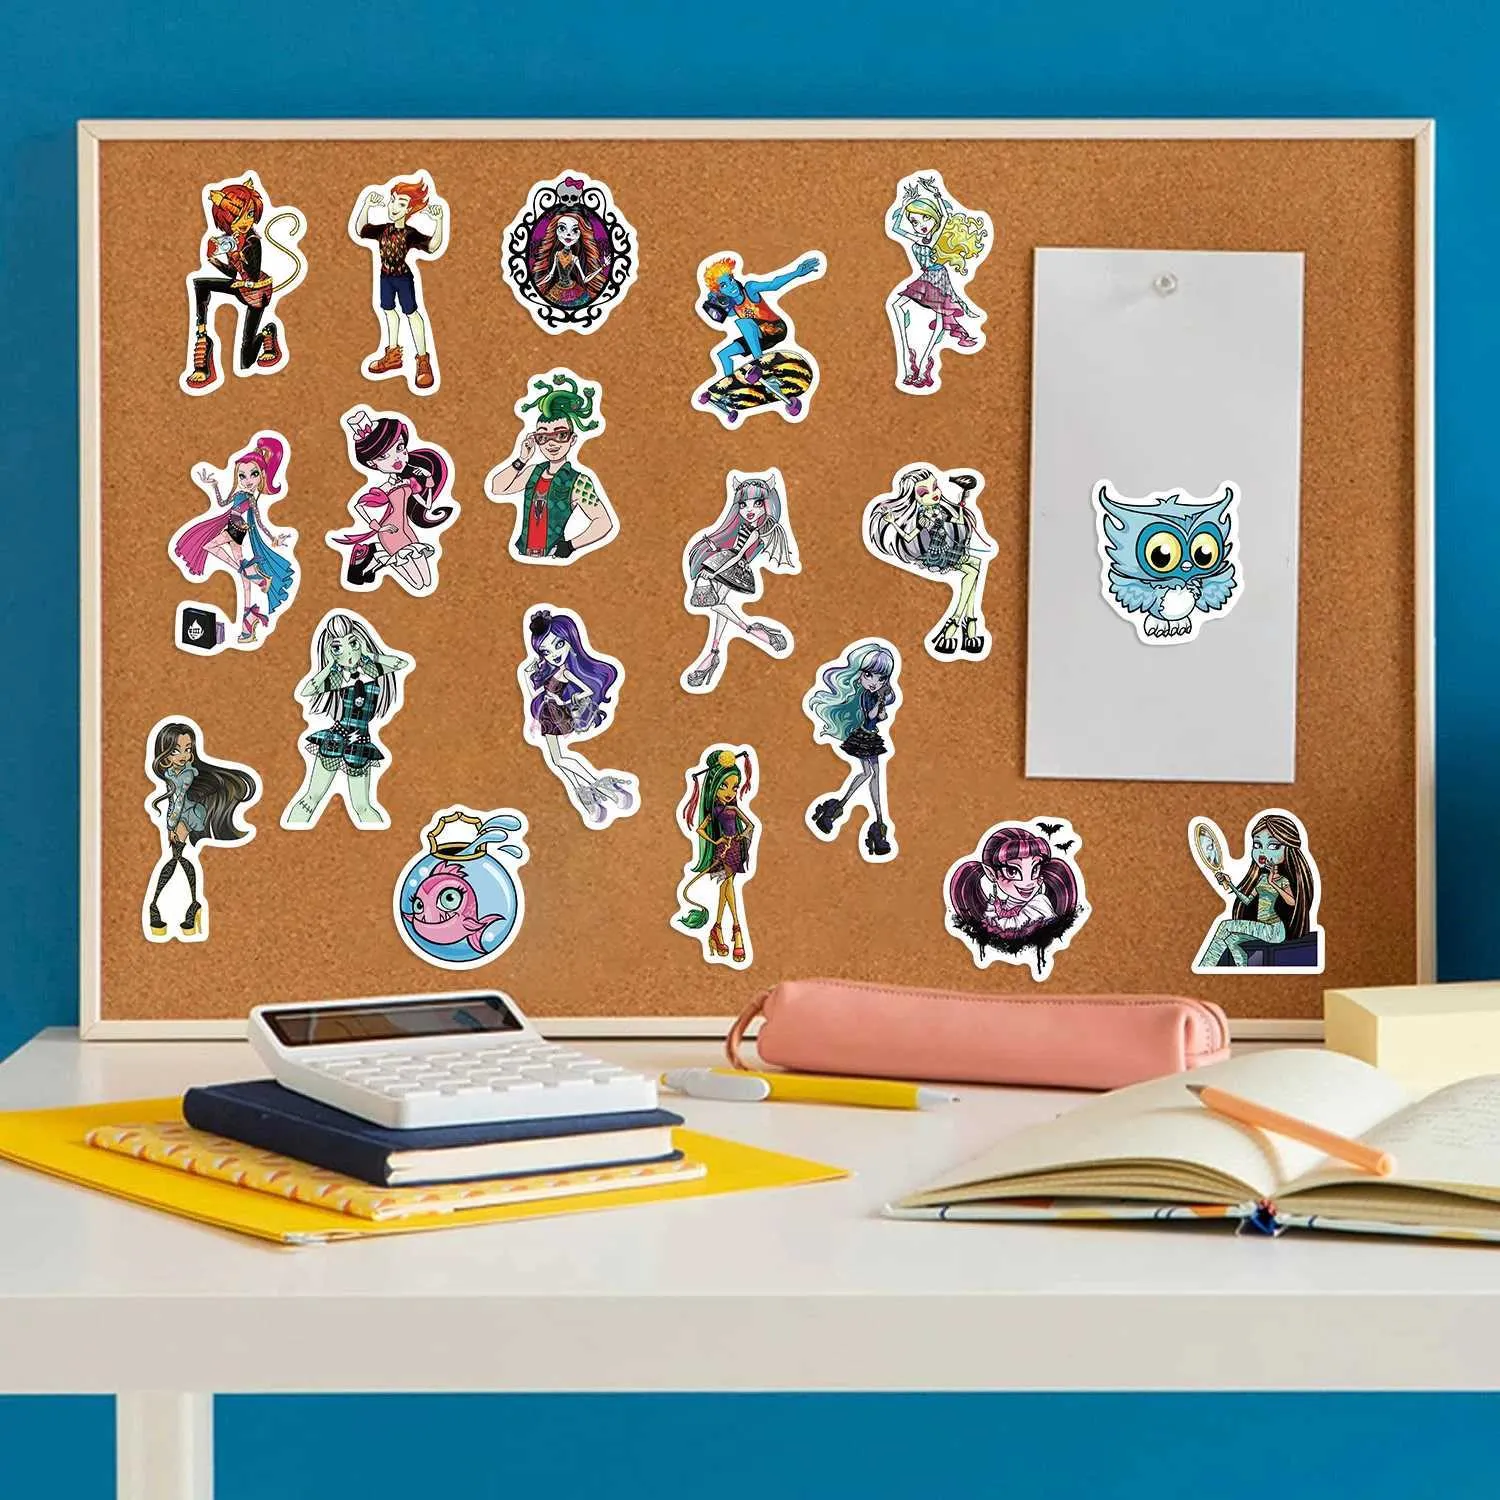 WGHTタトゥー転送70PCS Riman Monster High School Graffiti Sticker Pack for Bicycle Computer Notebook Car Crail冷蔵庫パーソナリティステッカー240427